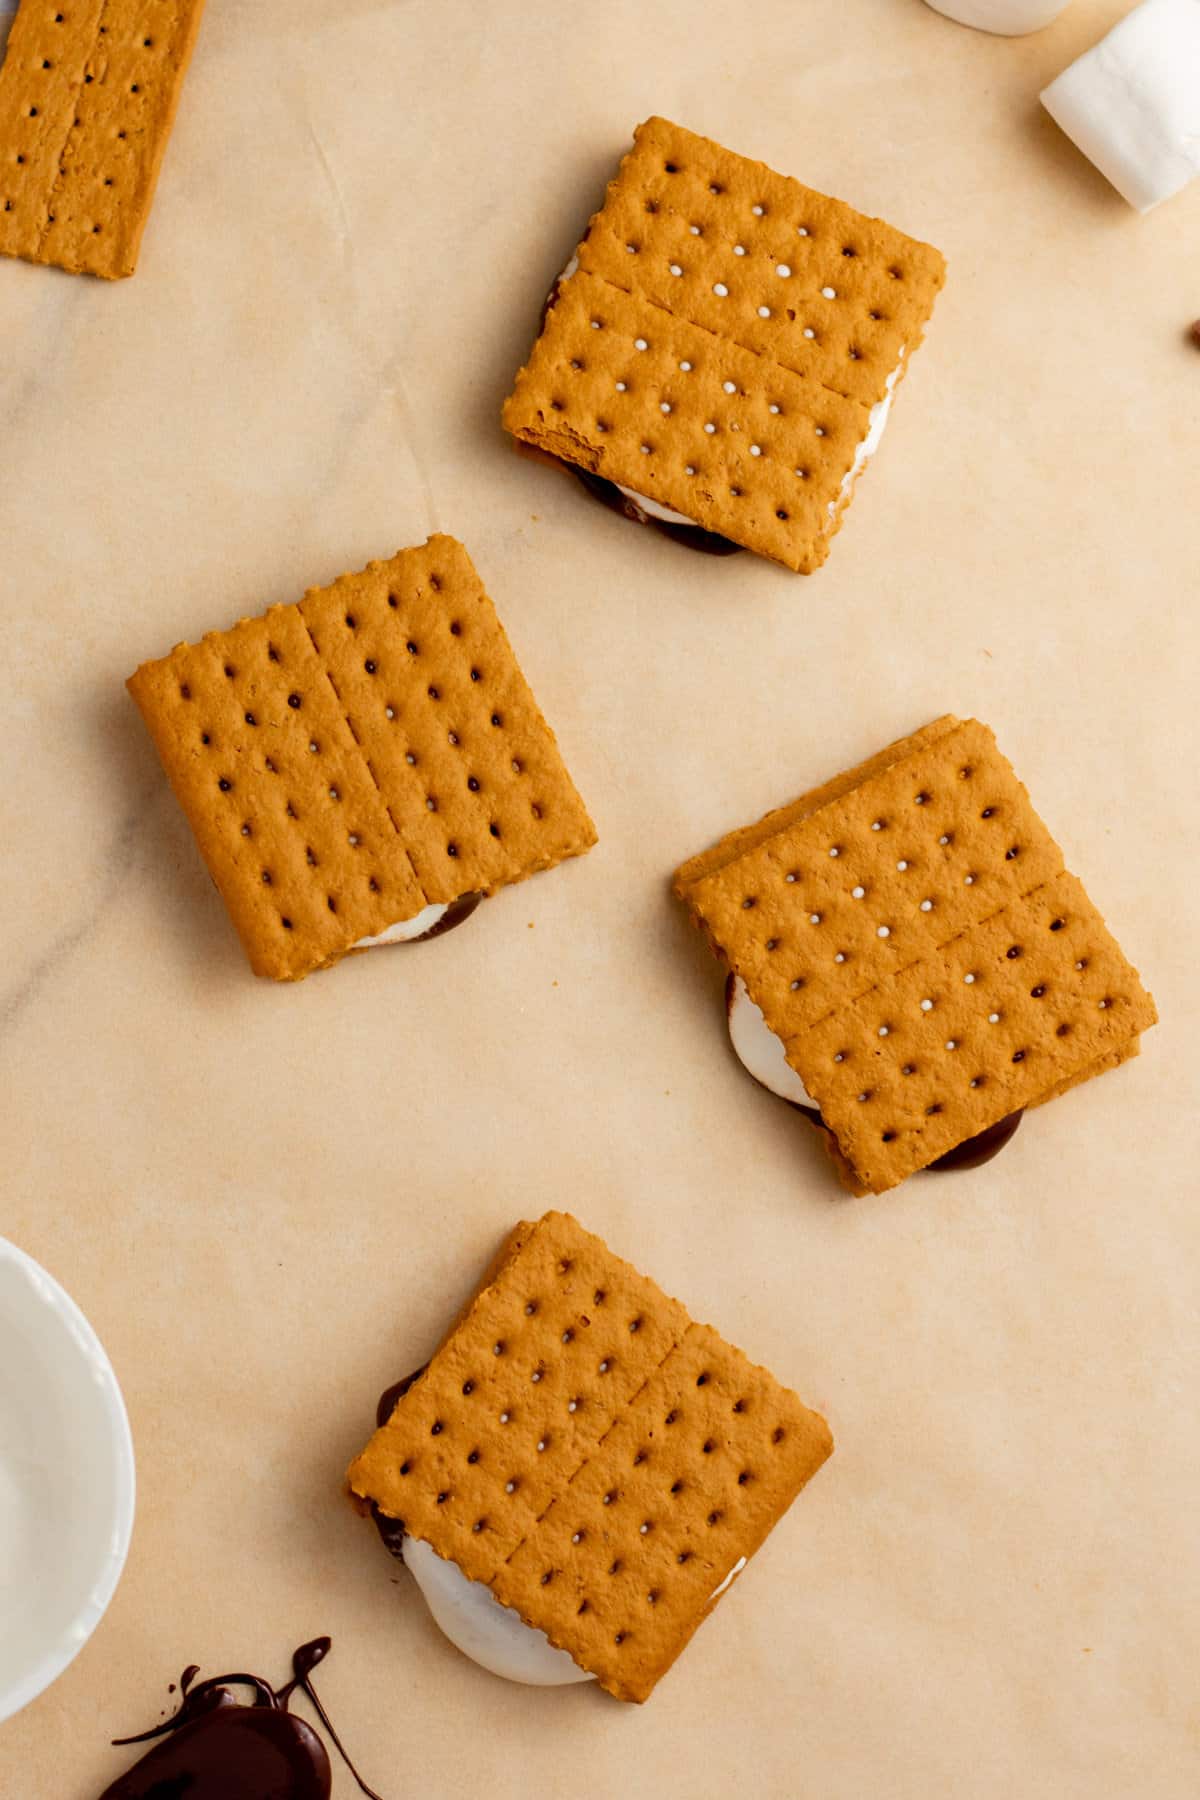 graham cracker placed on top of a s'more